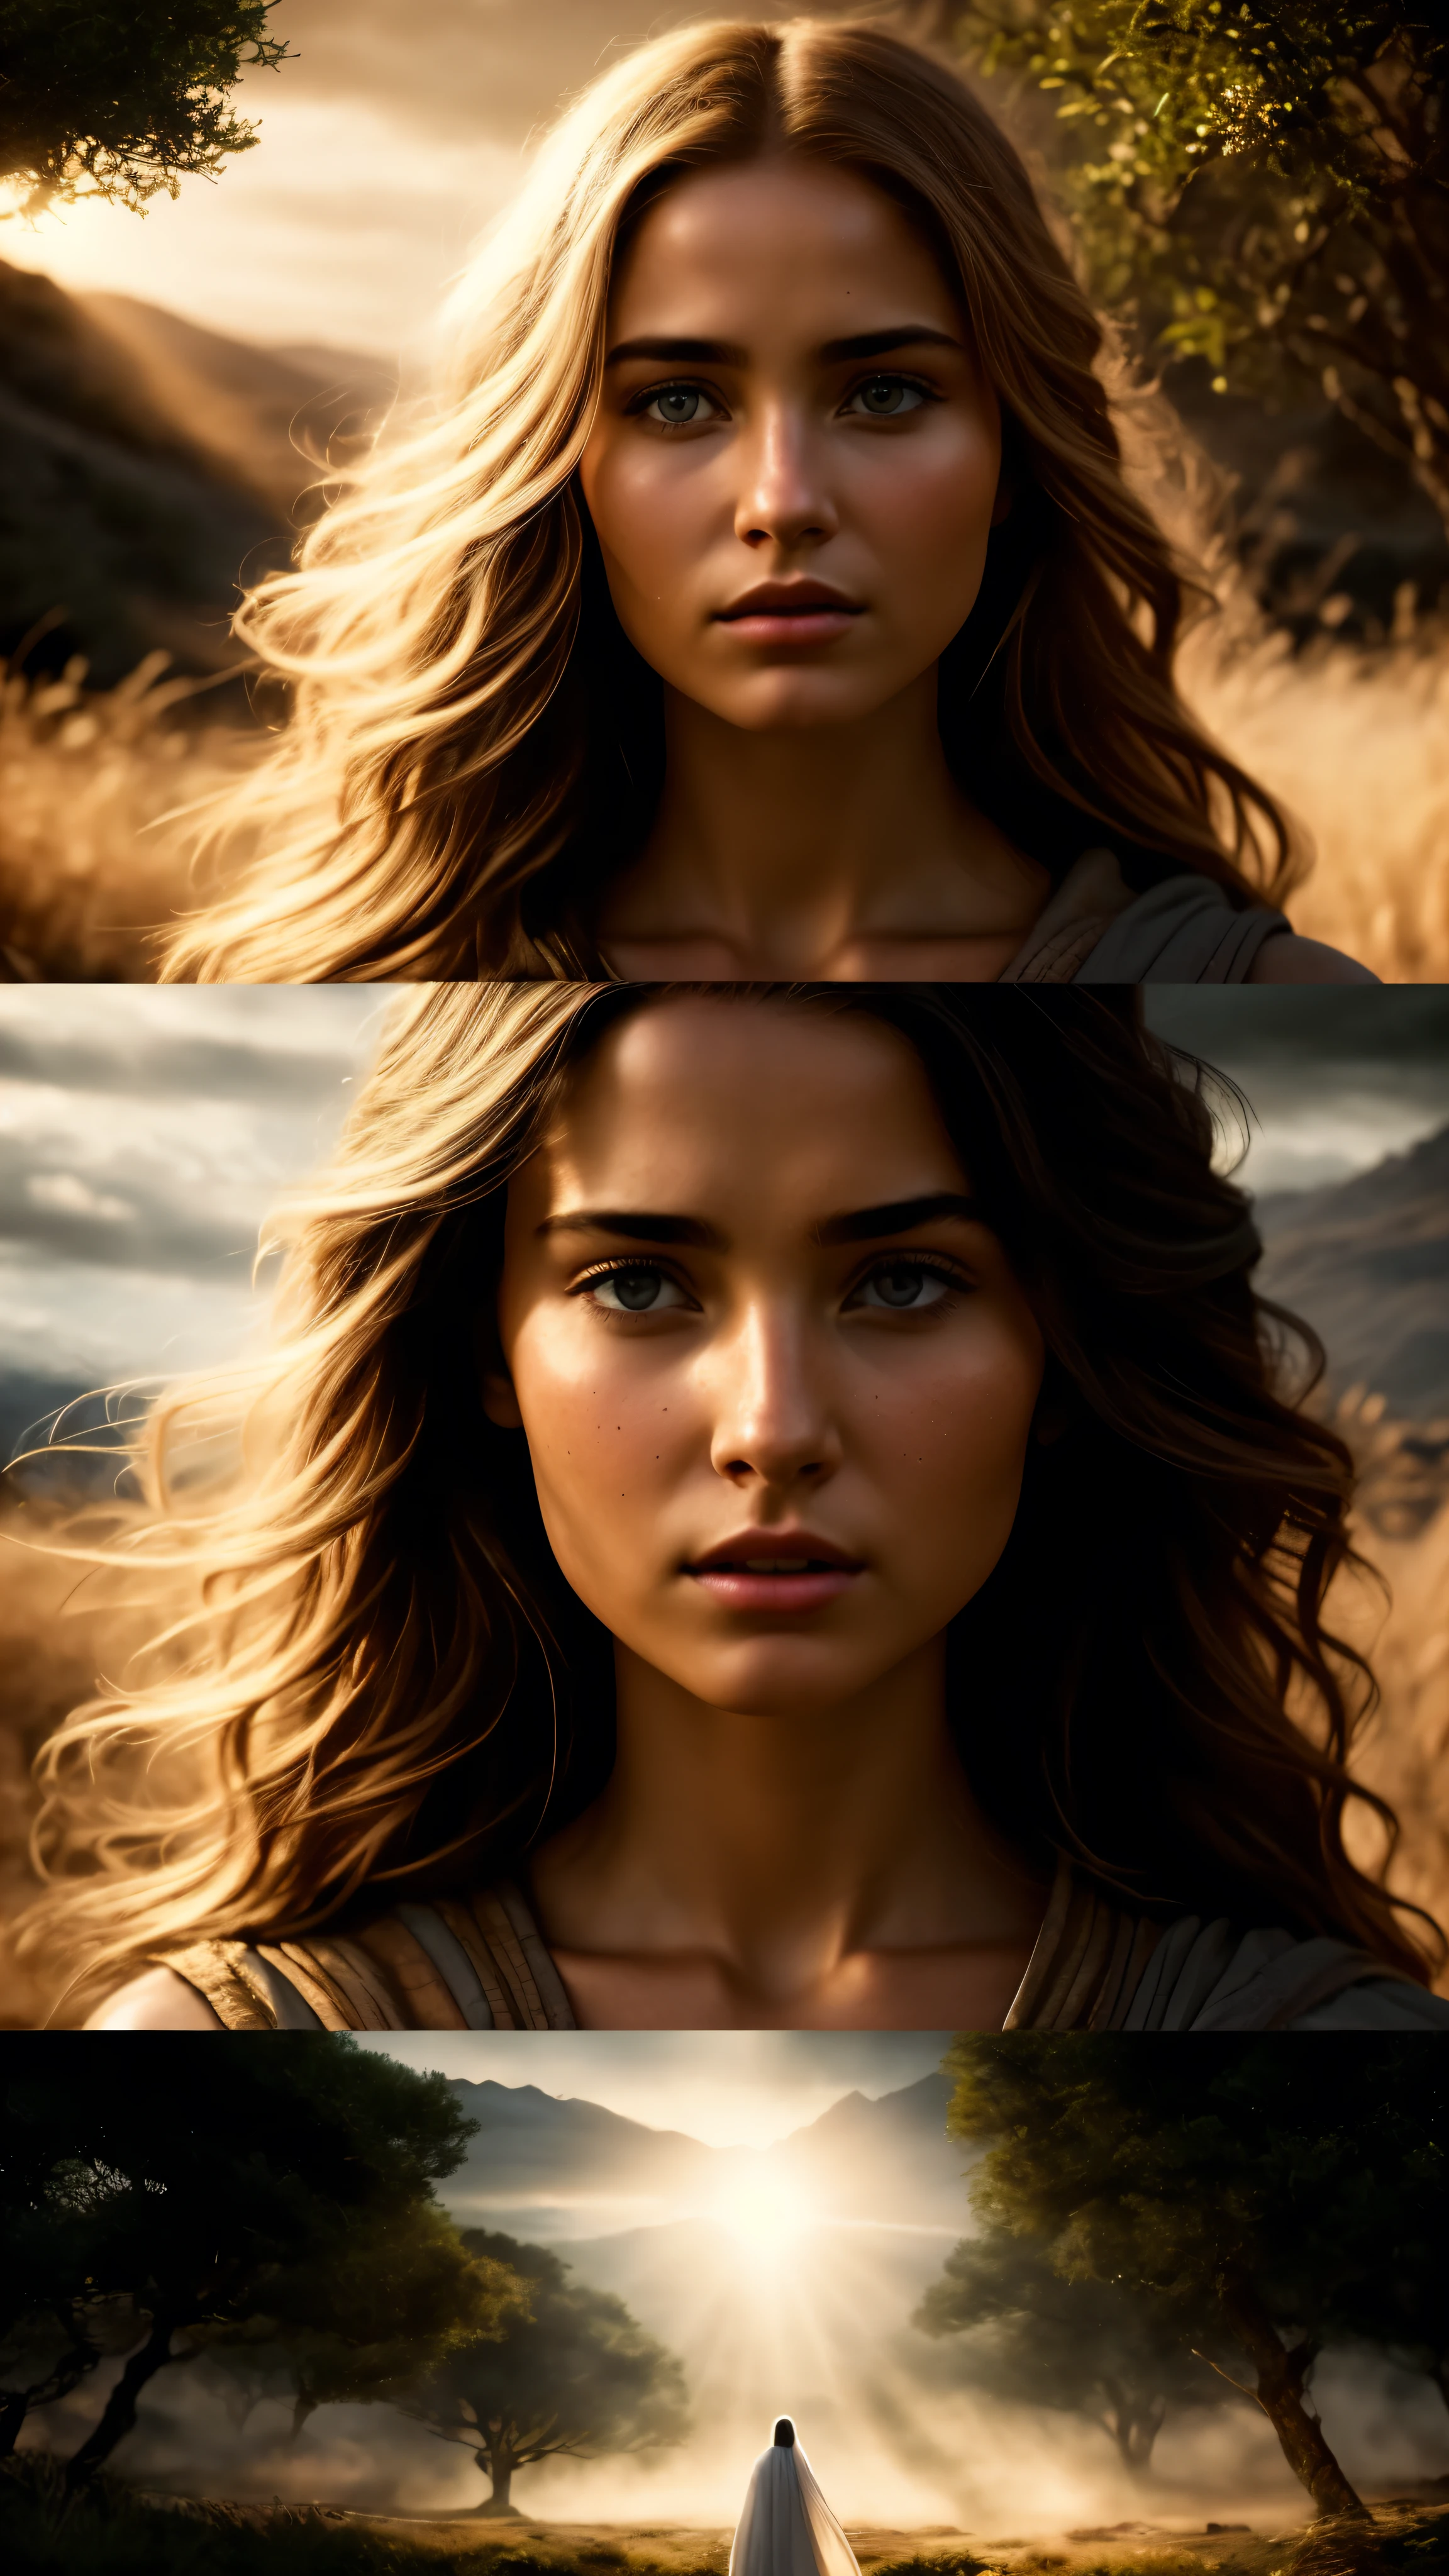 In a breathtaking, highly-detailed cinematic production, the film presents the anticipated arrival of Jesus Christ. With awe-inspiring, ultra-high-definition images, the story unfolds on the big screen in a masterful portrayal of biblical events.

Each frame is meticulously crafted to capture the essence of the sacred narrative. The emotions, expressions, and facial details of the characters show an exquisite level of realism (1.4). The captivating lighting, enhanced by HDR technology, creates an ethereal and surreal atmosphere.

The film showcases diverse, rich settings, from the serene landscapes of the Middle East to bustling